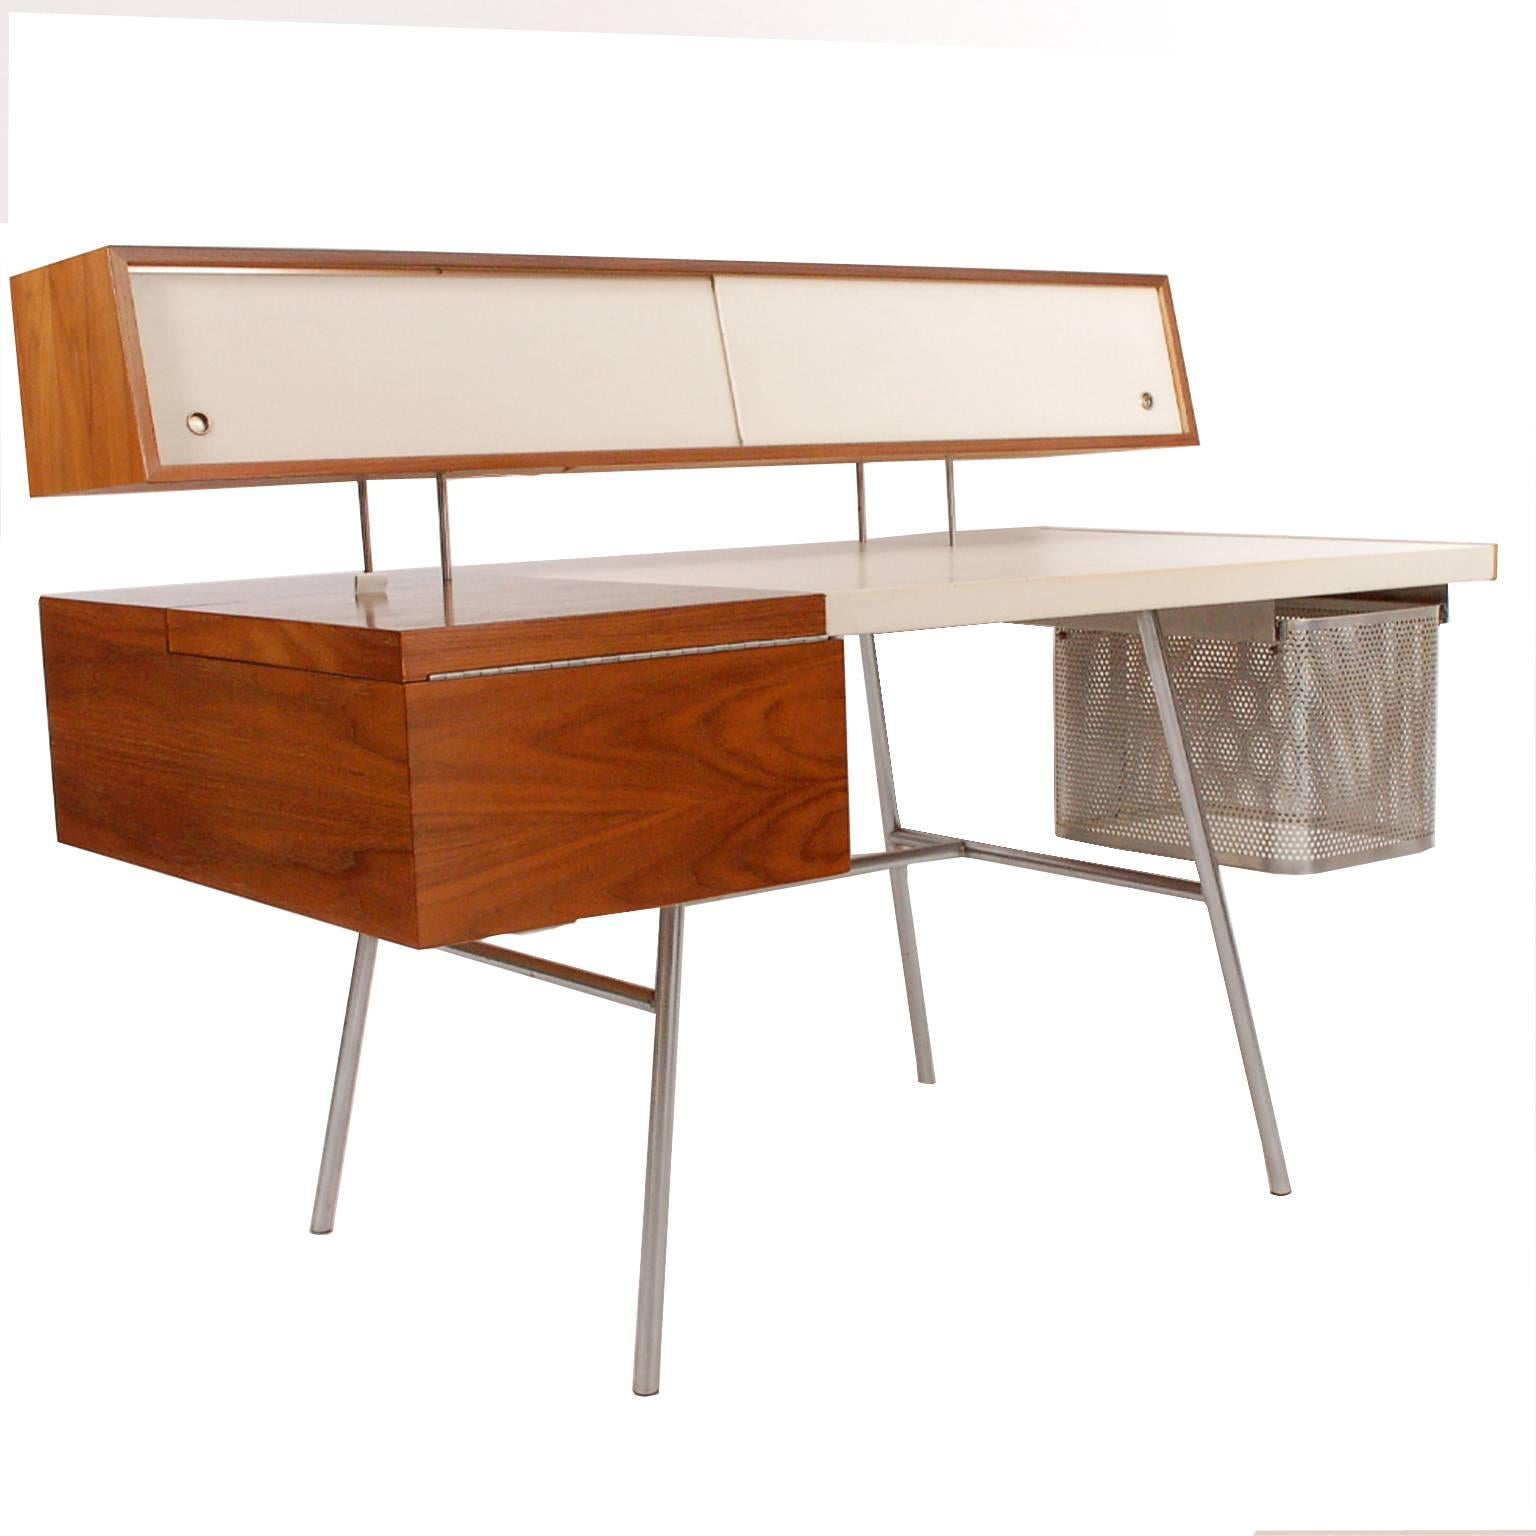 Walnut with original custom white leather writing surface and sliding floating doors, small drawers in maple. Storage and drop down typing table with original perforated aluminum file drawer. On steel legs. Made by Herman Miller.